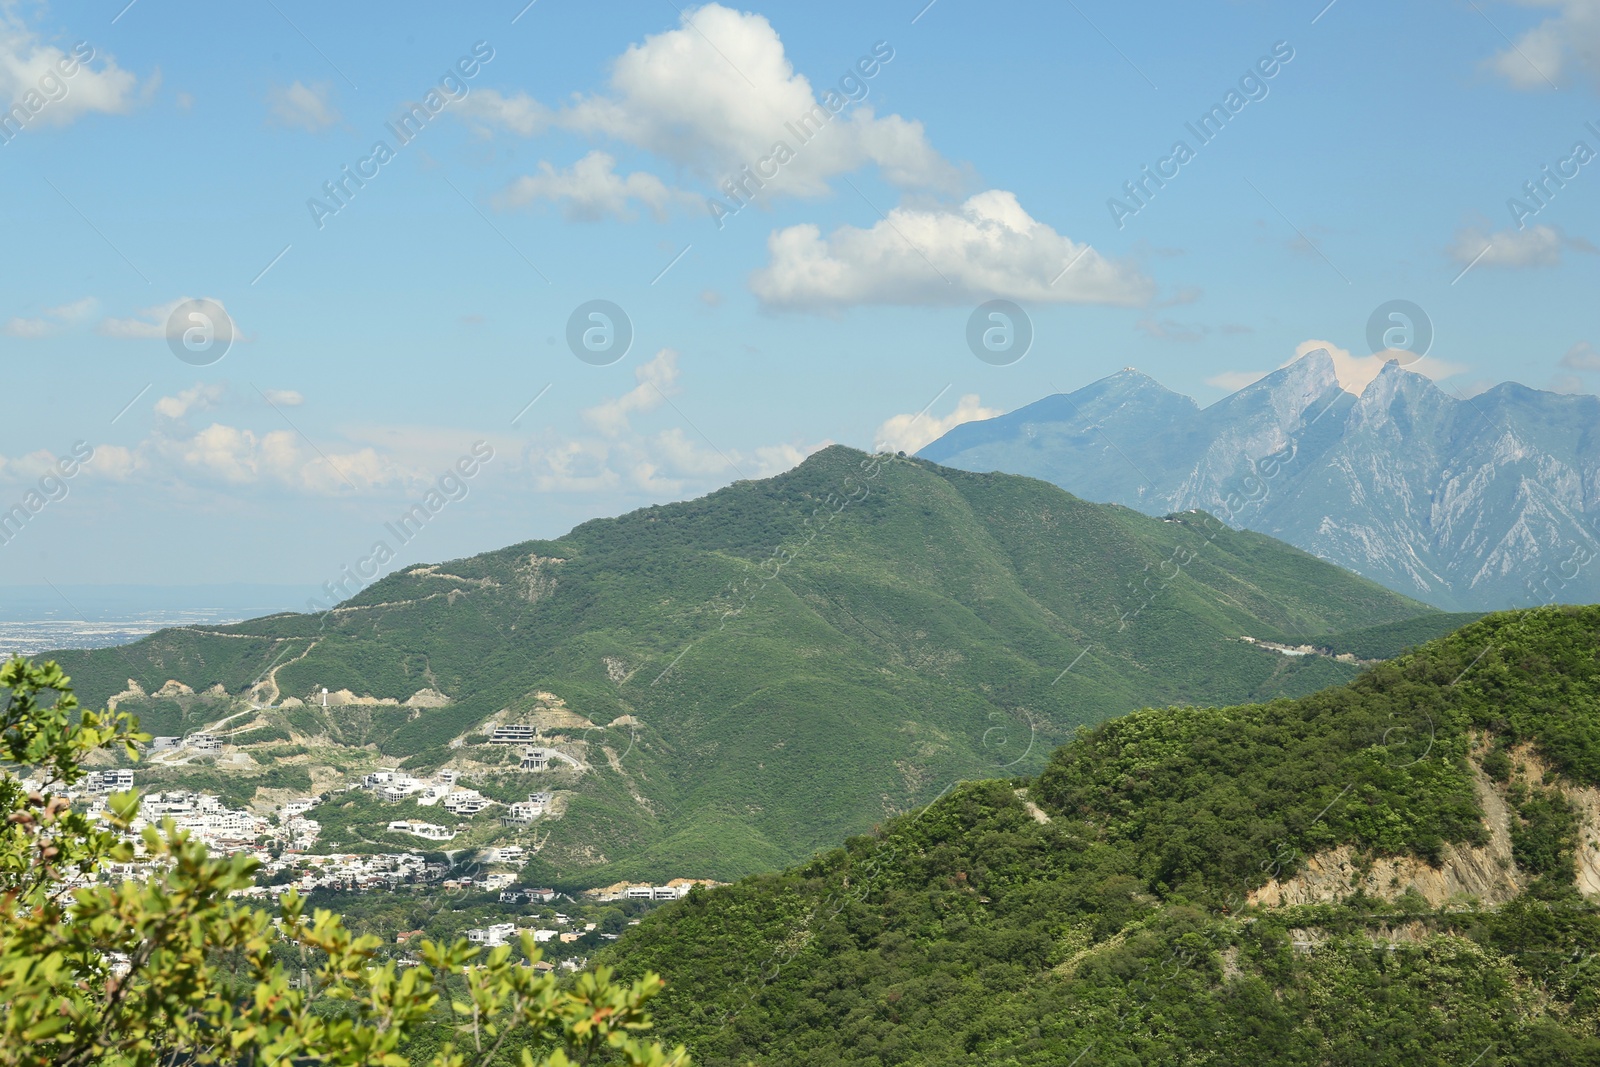 Photo of Picturesque view of big mountains and trees under cloudy sky